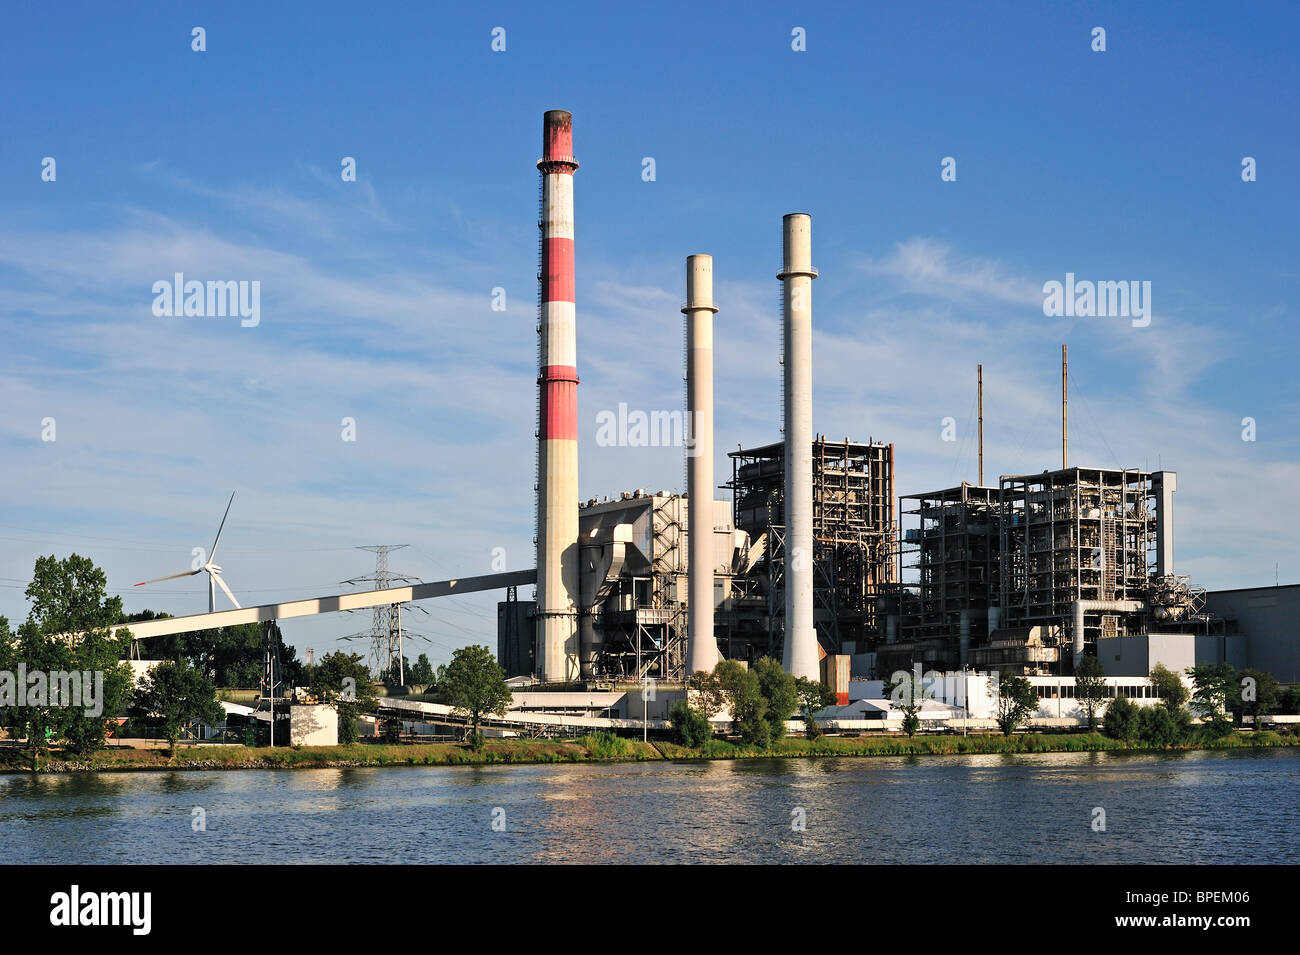 Electrabel power station lungo il canale Gand-Terneuzen a Gand seaport, Belgio Foto Stock